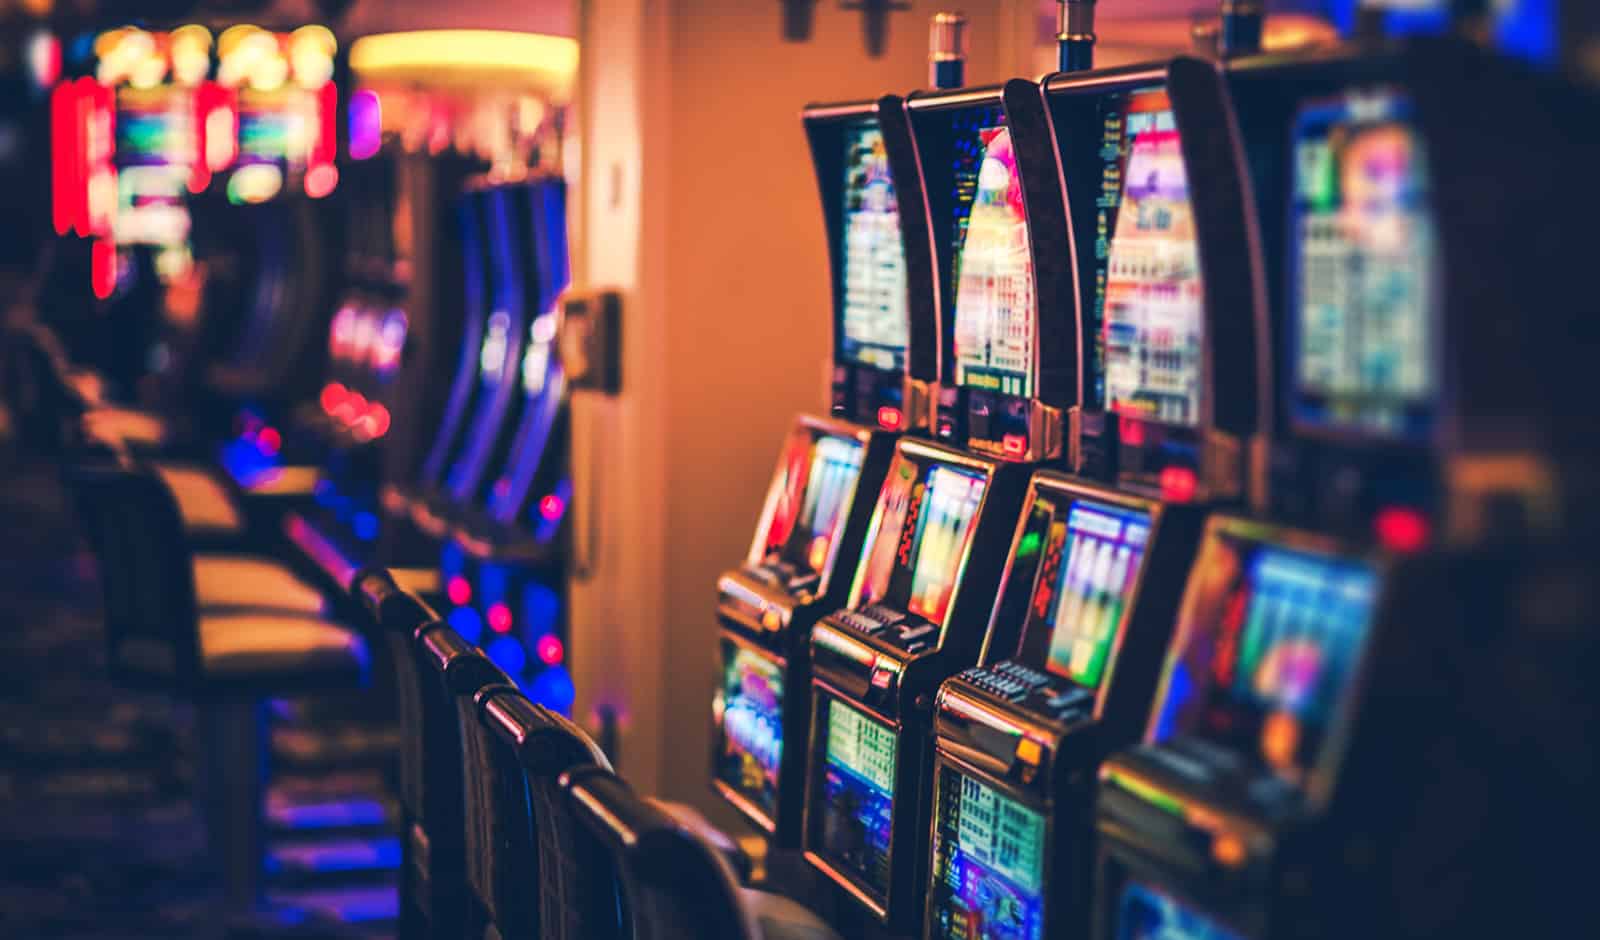 Most popular slot games among high rollers